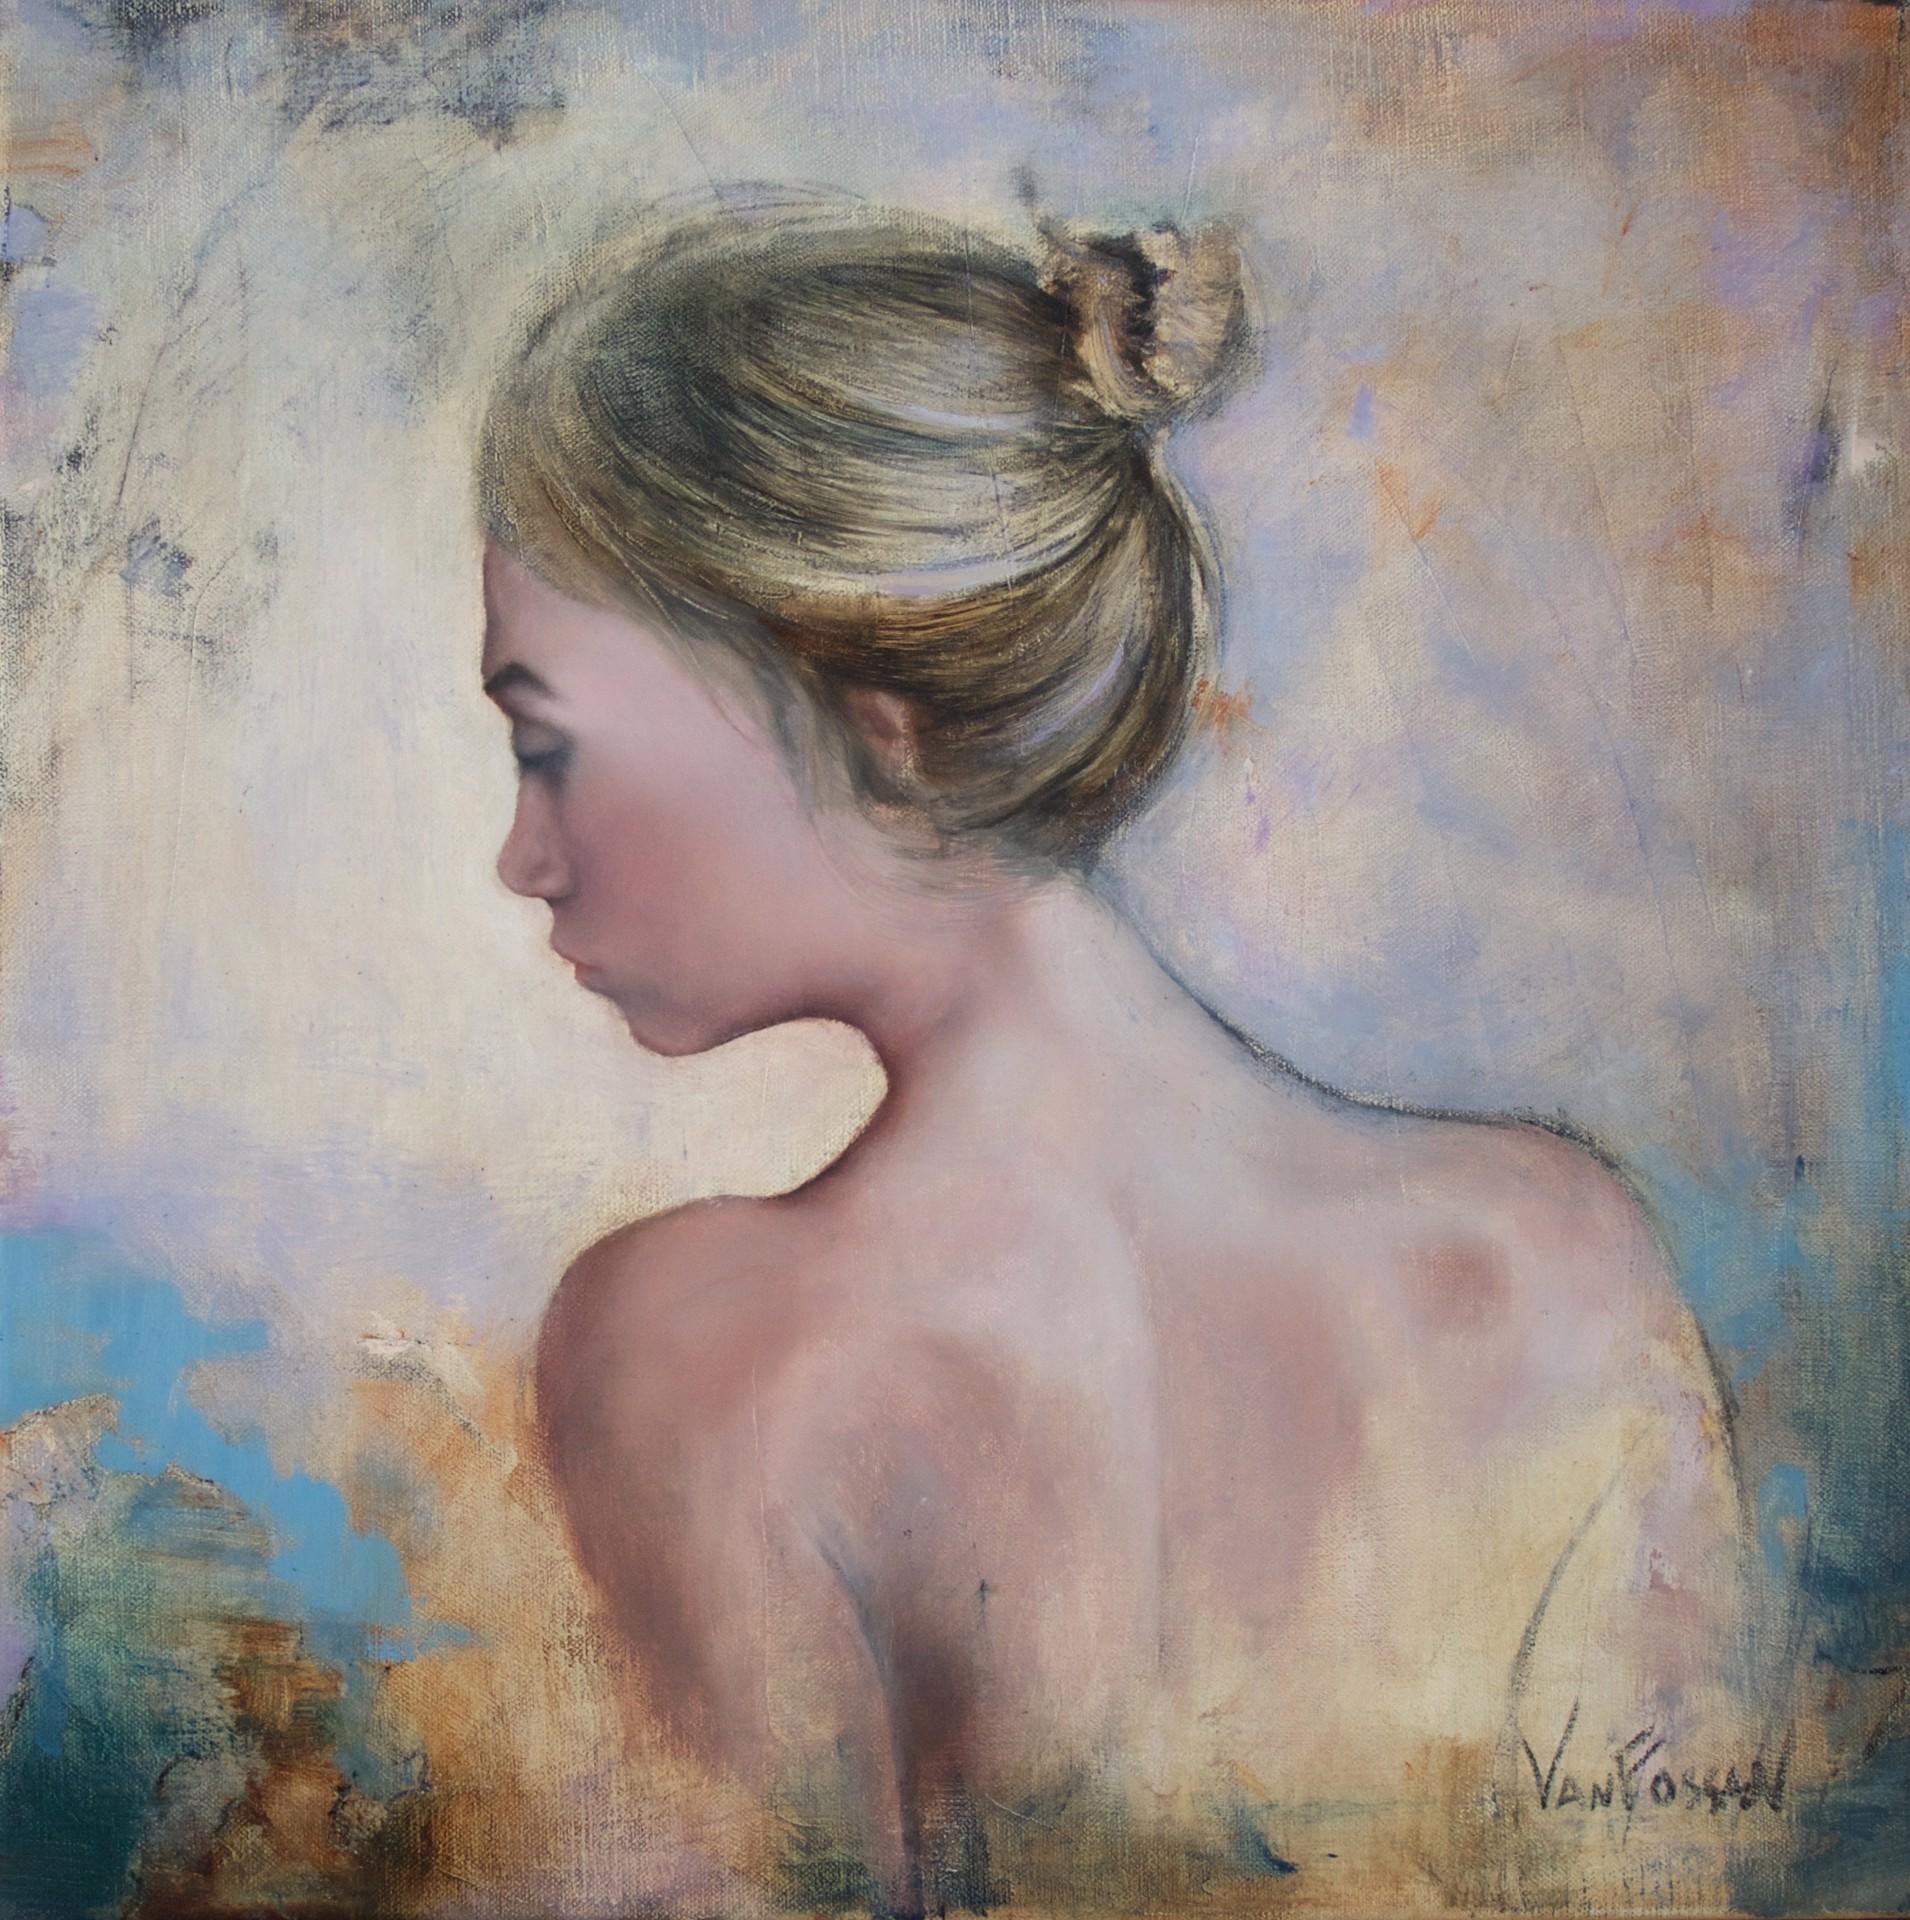 James Van Fossan's "Presence" (2023) is an exquisite oil on linen painting that captures the tranquil beauty of a woman in a moment of quiet reflection. This 16 x 16-inch artwork, though unframed, is ready to hang and draws the viewer into a serene